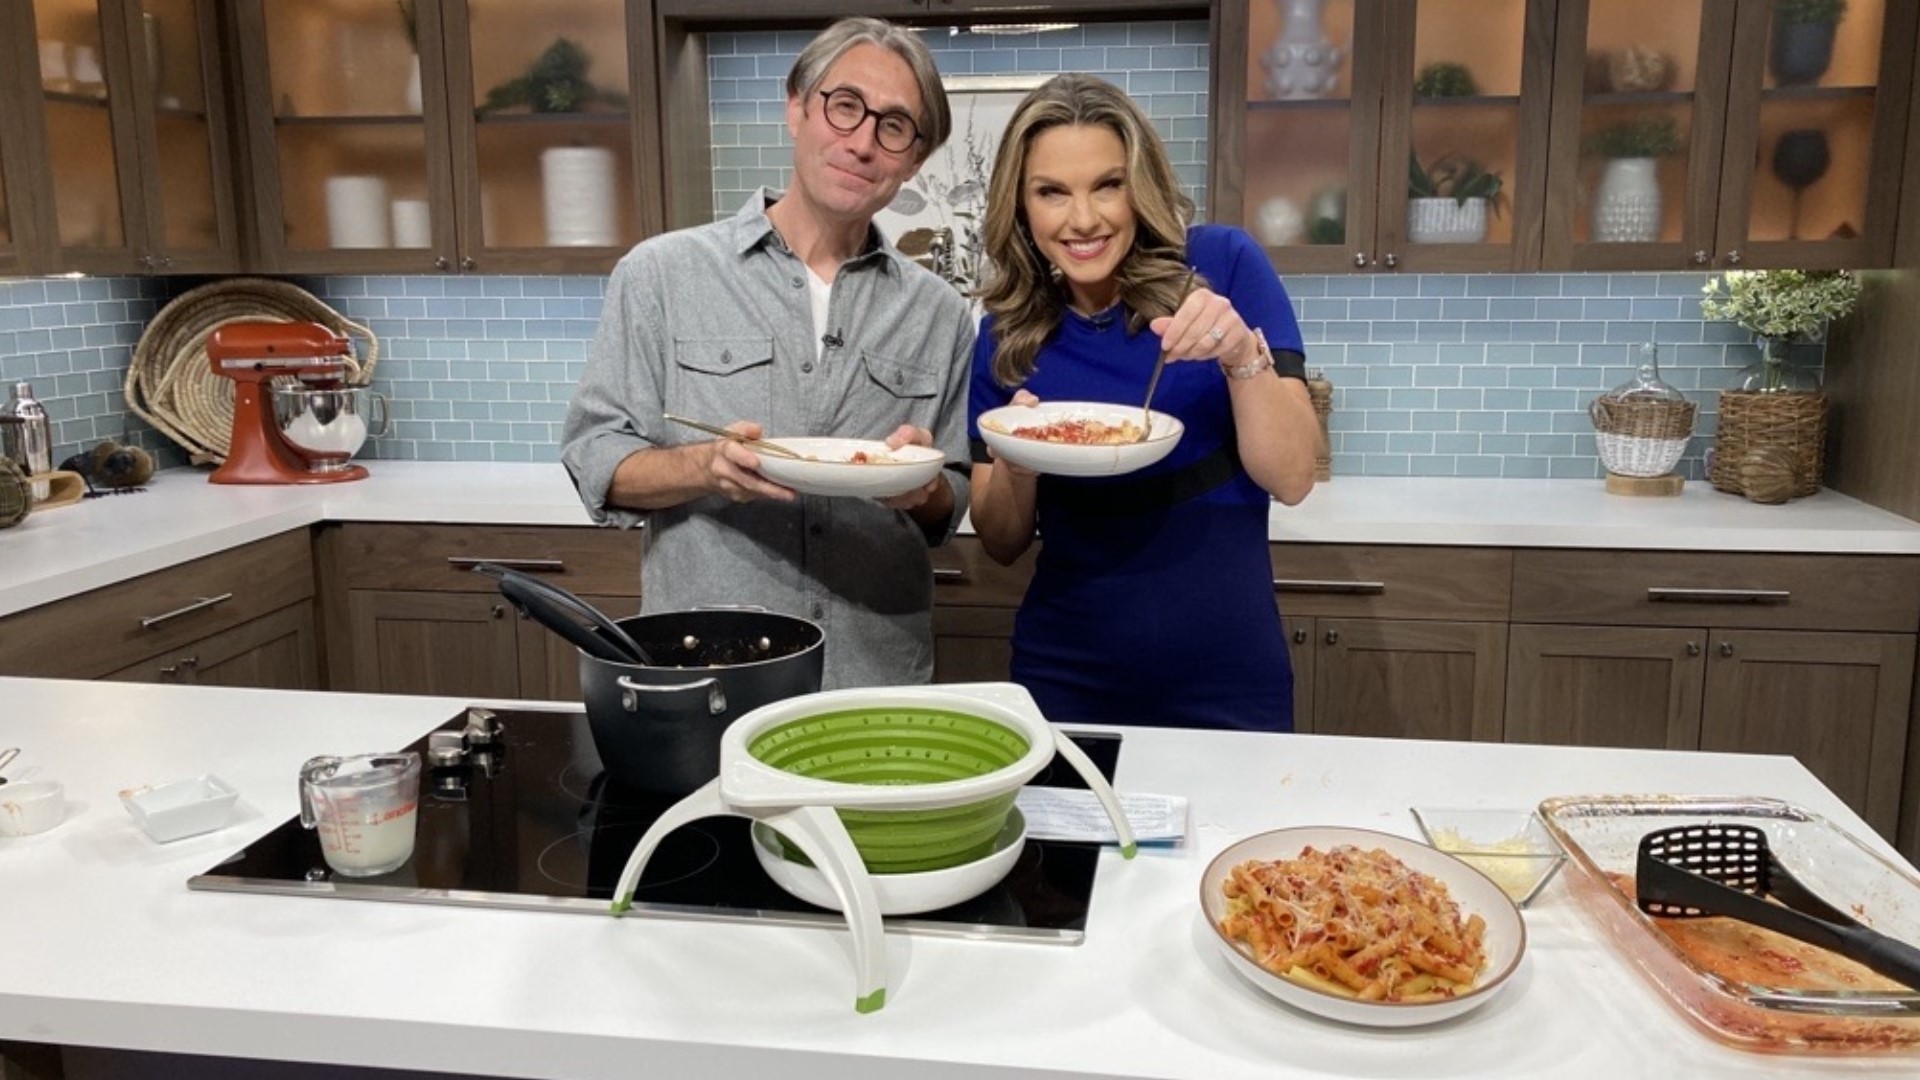 J.M. Hirsch makes this roasted tomato and anchovy sauce from "Cook What You Have," a cookbook that helps you make a meal out of what’s in your pantry! #newdaynw